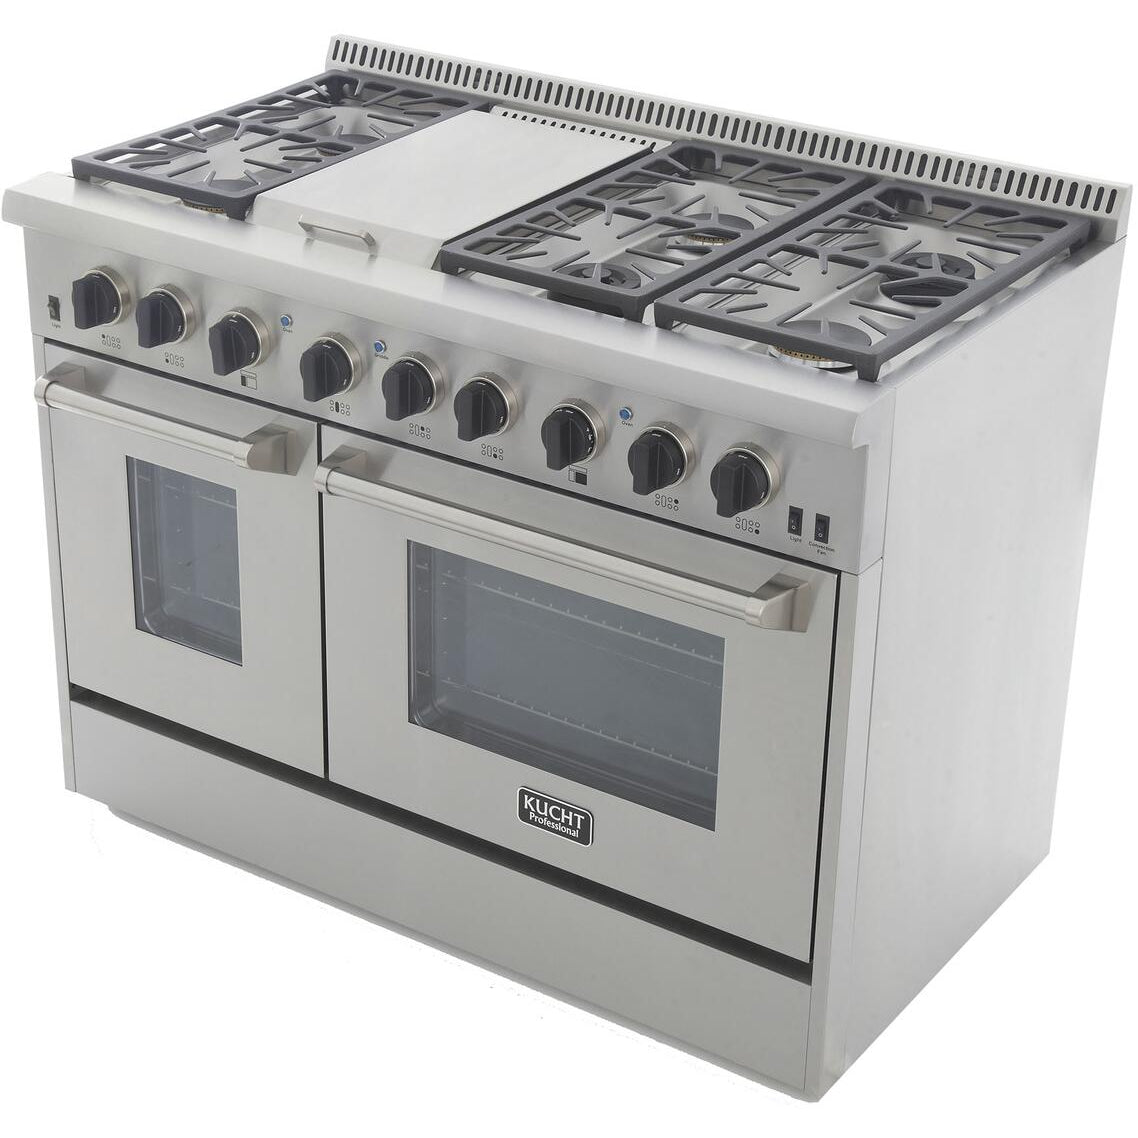 Kucht KRG Series 48" Freestanding Natural Gas Range With 6 Burners, Griddle and Tuxedo Black Knobs